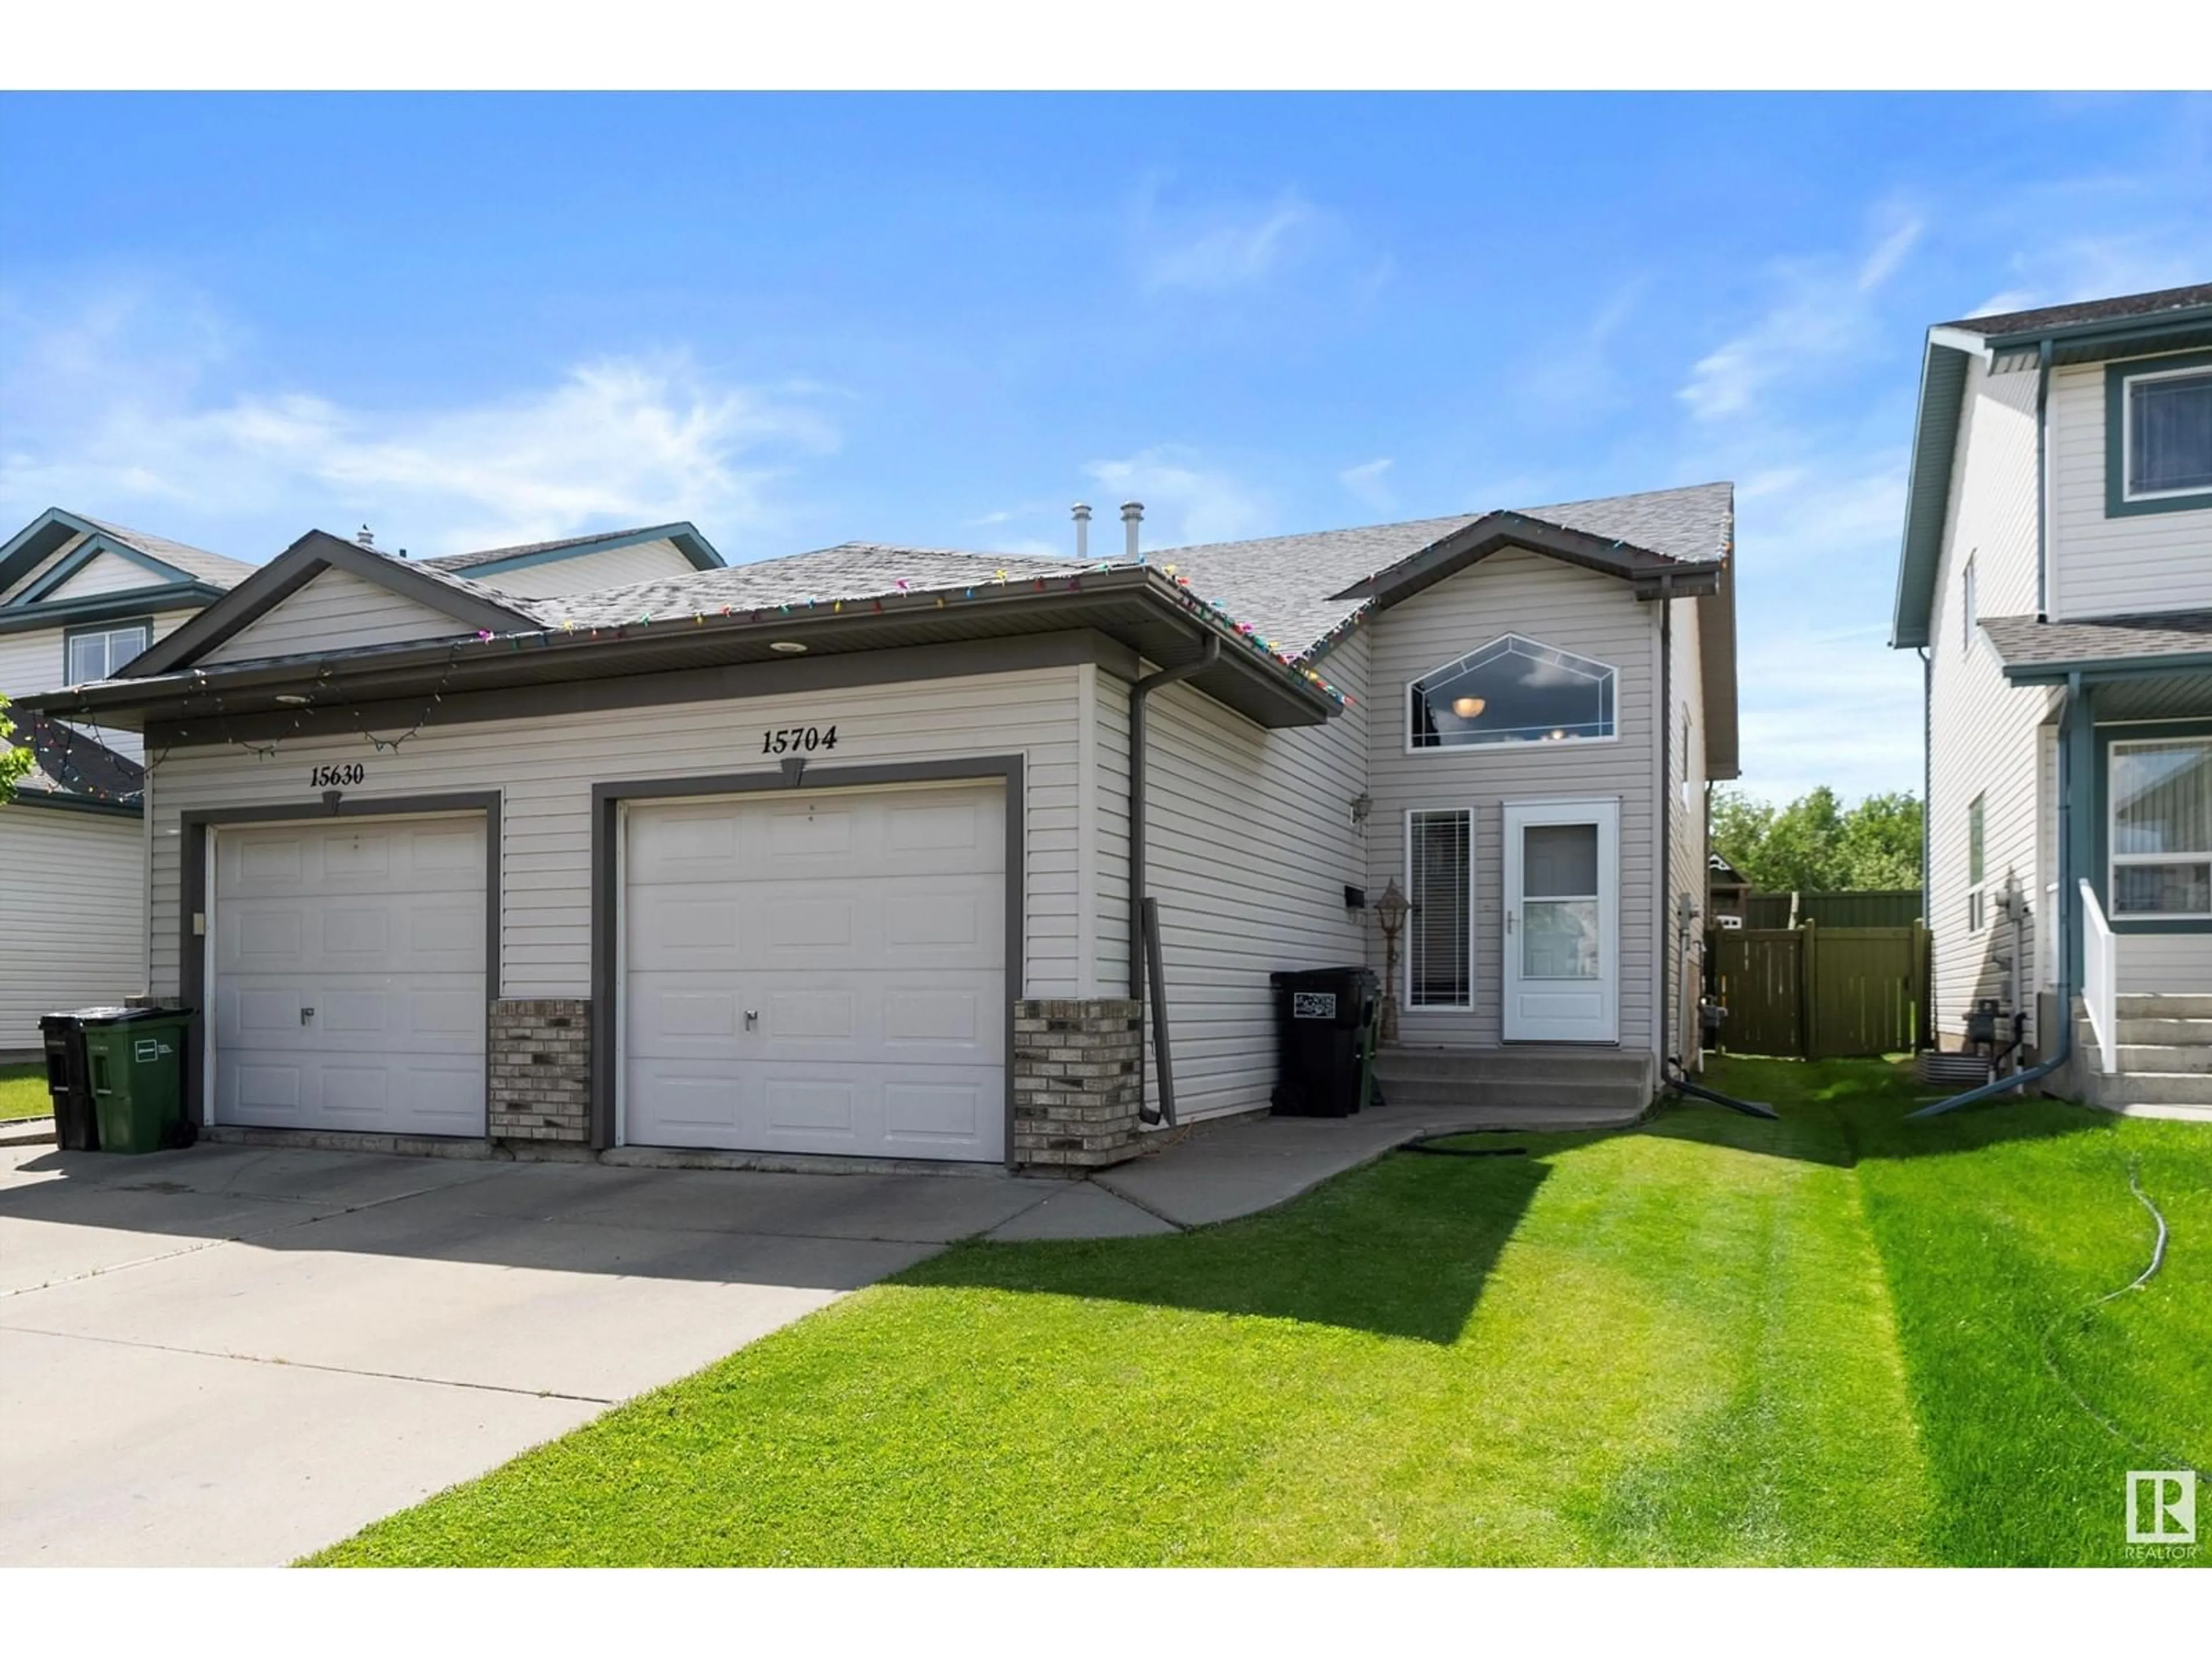 A pic from exterior of the house or condo for 15704 141 ST NW, Edmonton Alberta T6V1T2